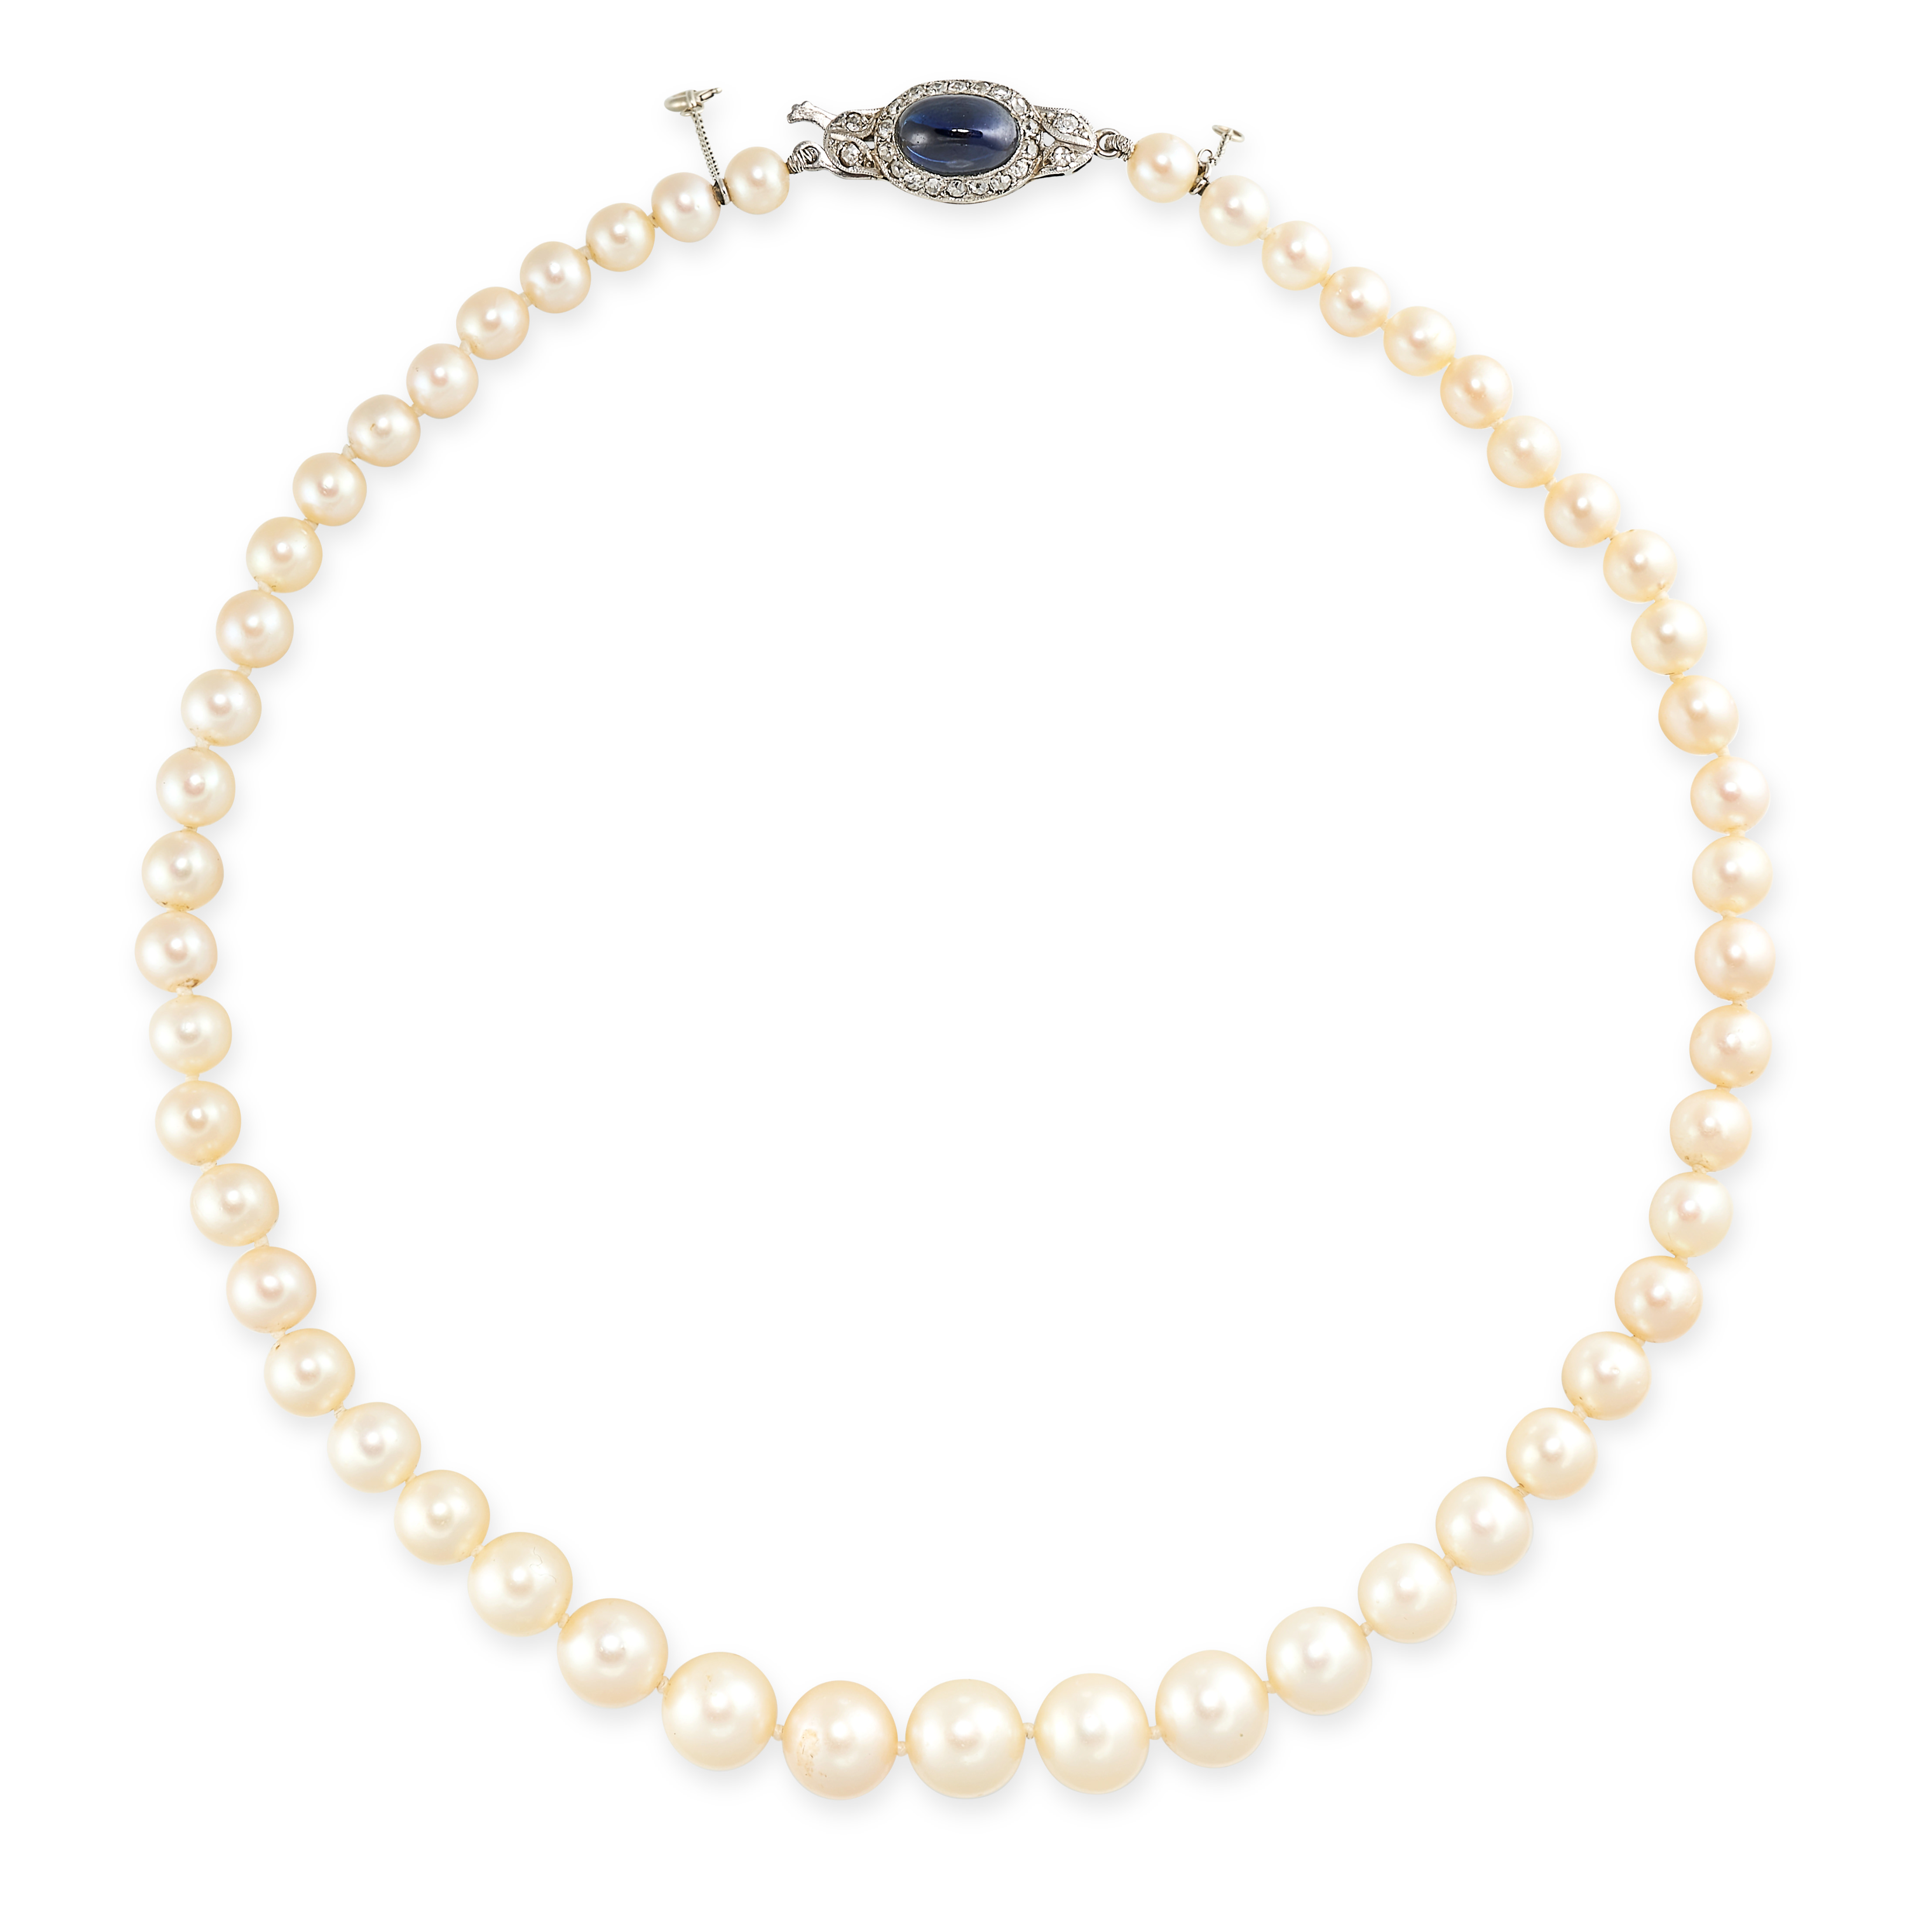 A PEARL, SAPPHIRE AND DIAMOND NECKLACE comprising a single row of pearls ranging from 5.0mm-8.6mm,